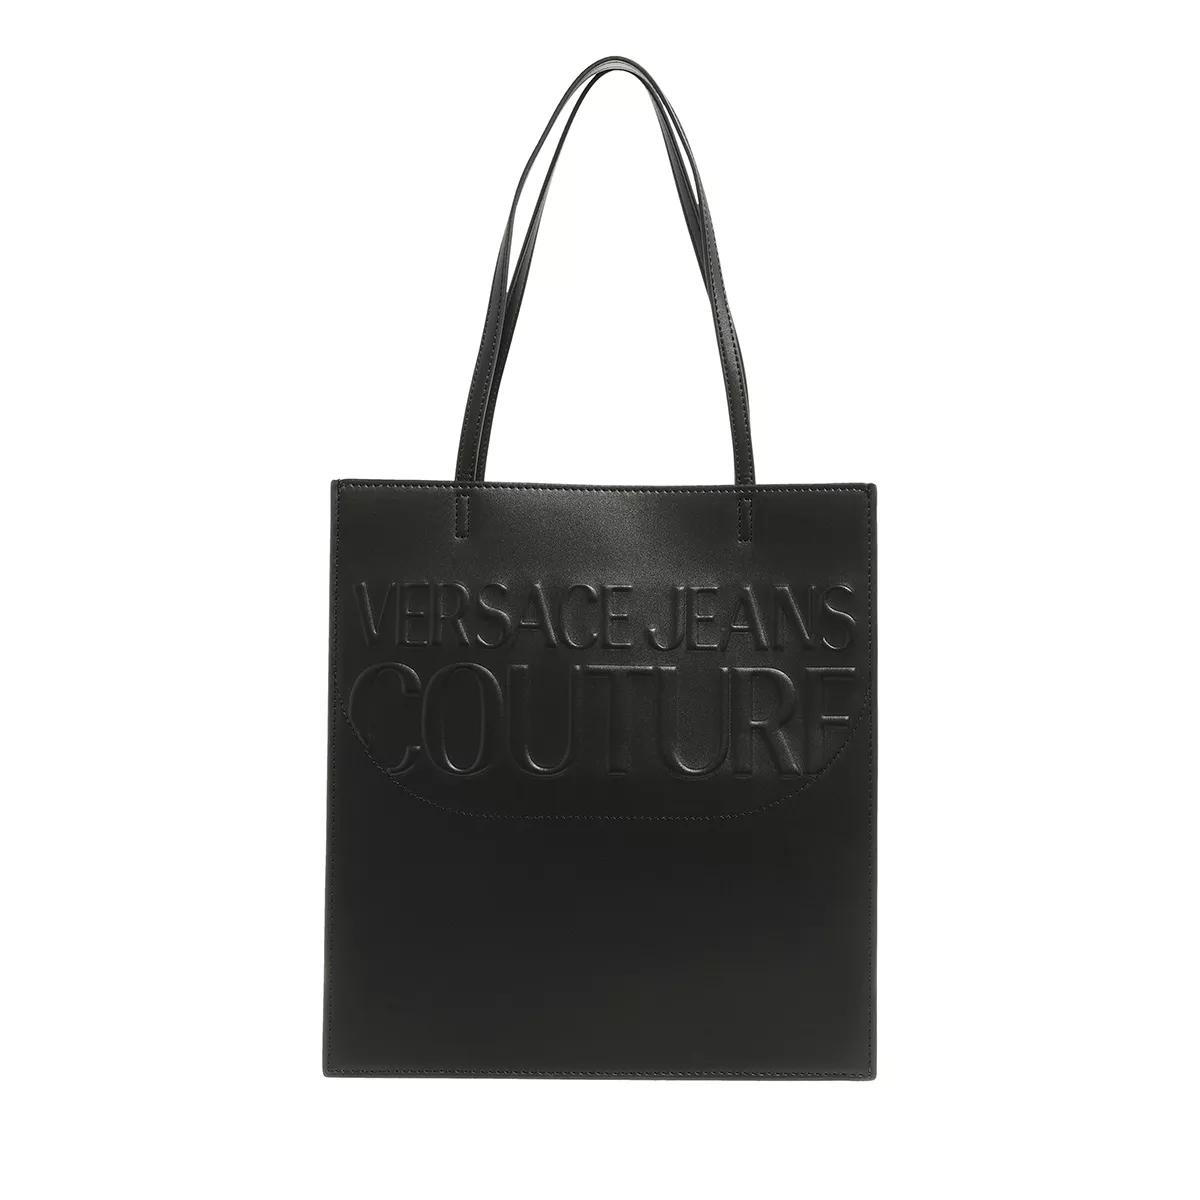 Versace Jeans Couture Institutional Logo Black | Tote | fashionette